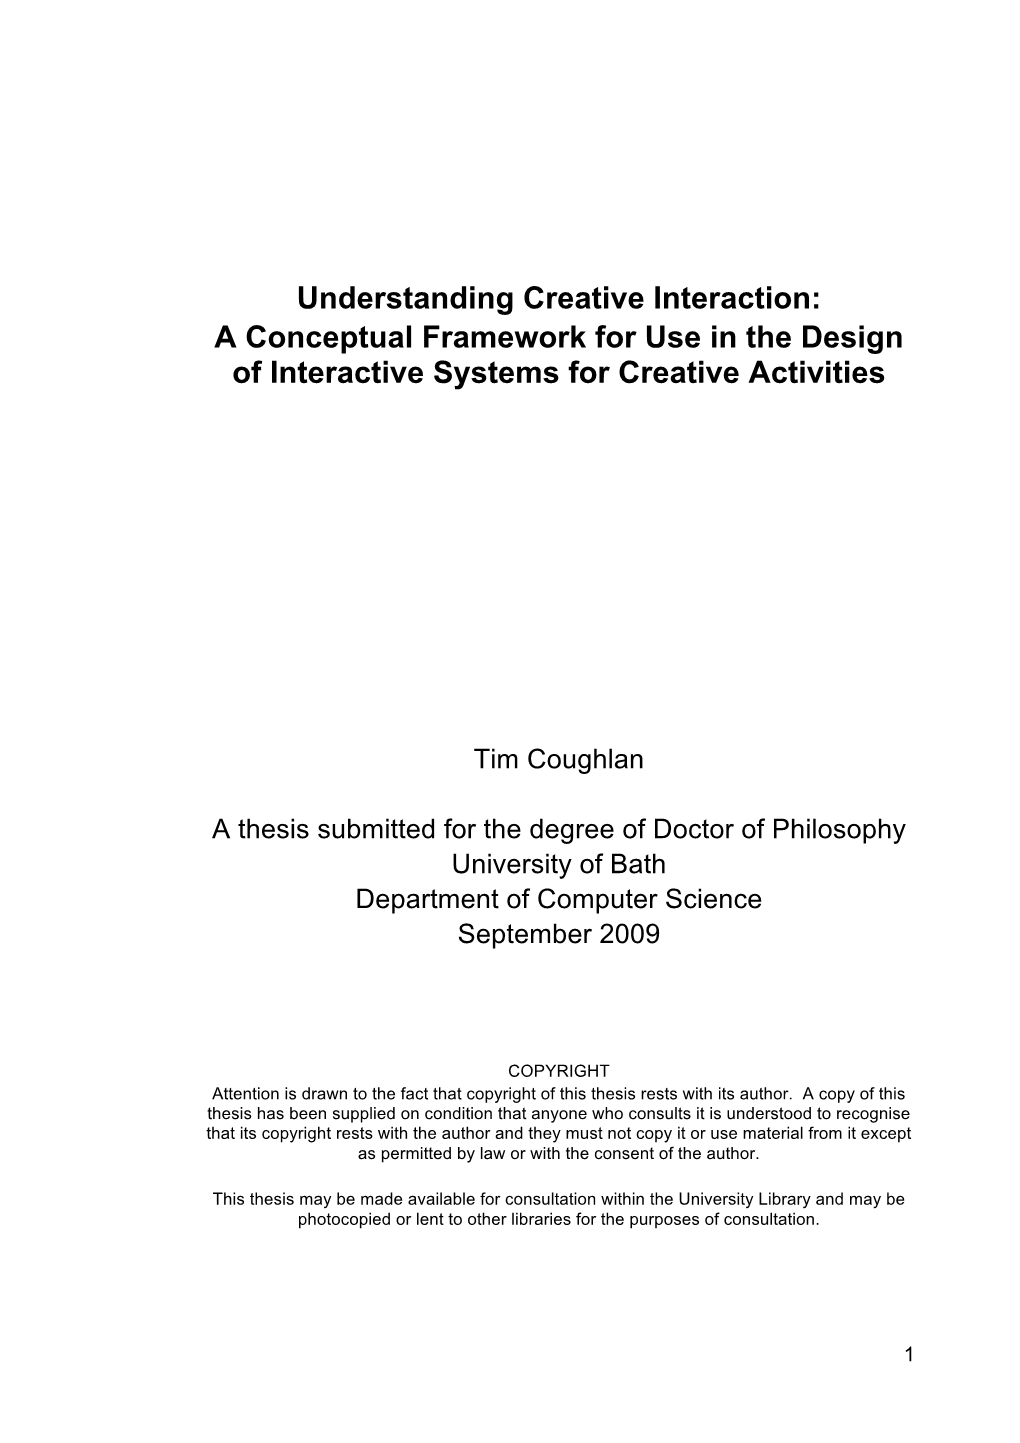 Understanding Creative Interaction: a Conceptual Framework for Use in the Design of Interactive Systems for Creative Activities